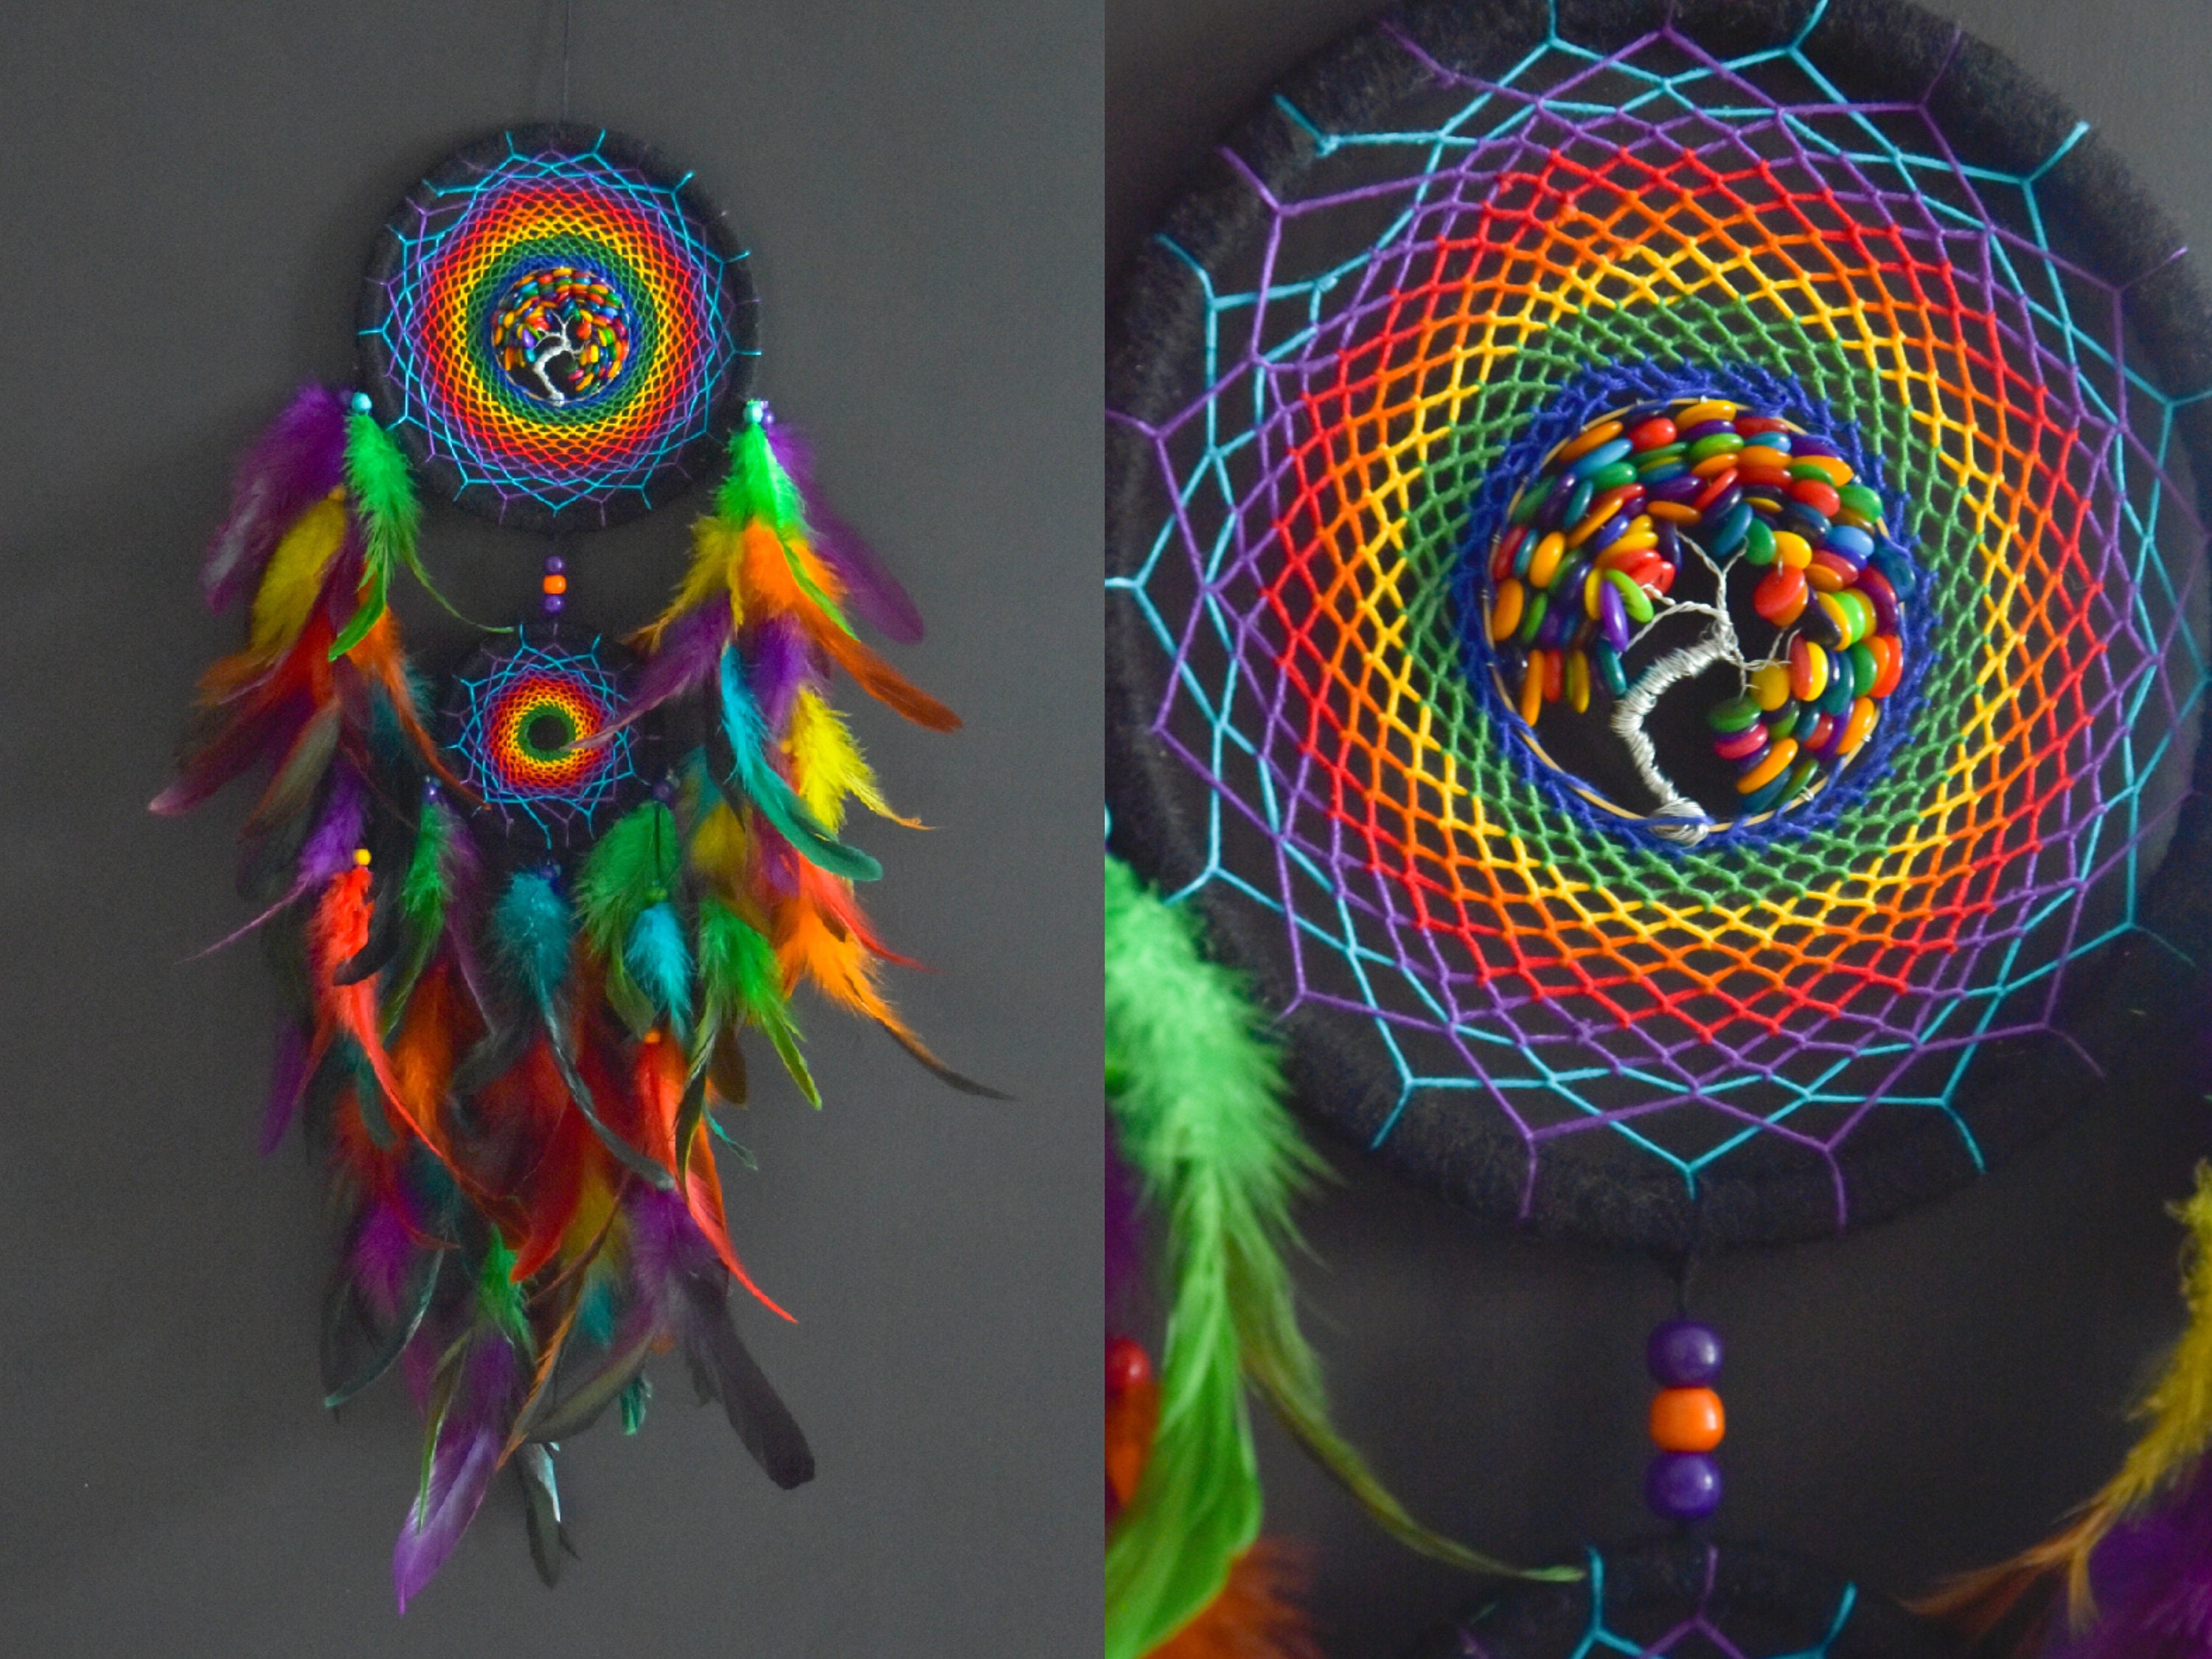 How to Make a Dream Catcher (Colorful Rainbow with Beads) - Single